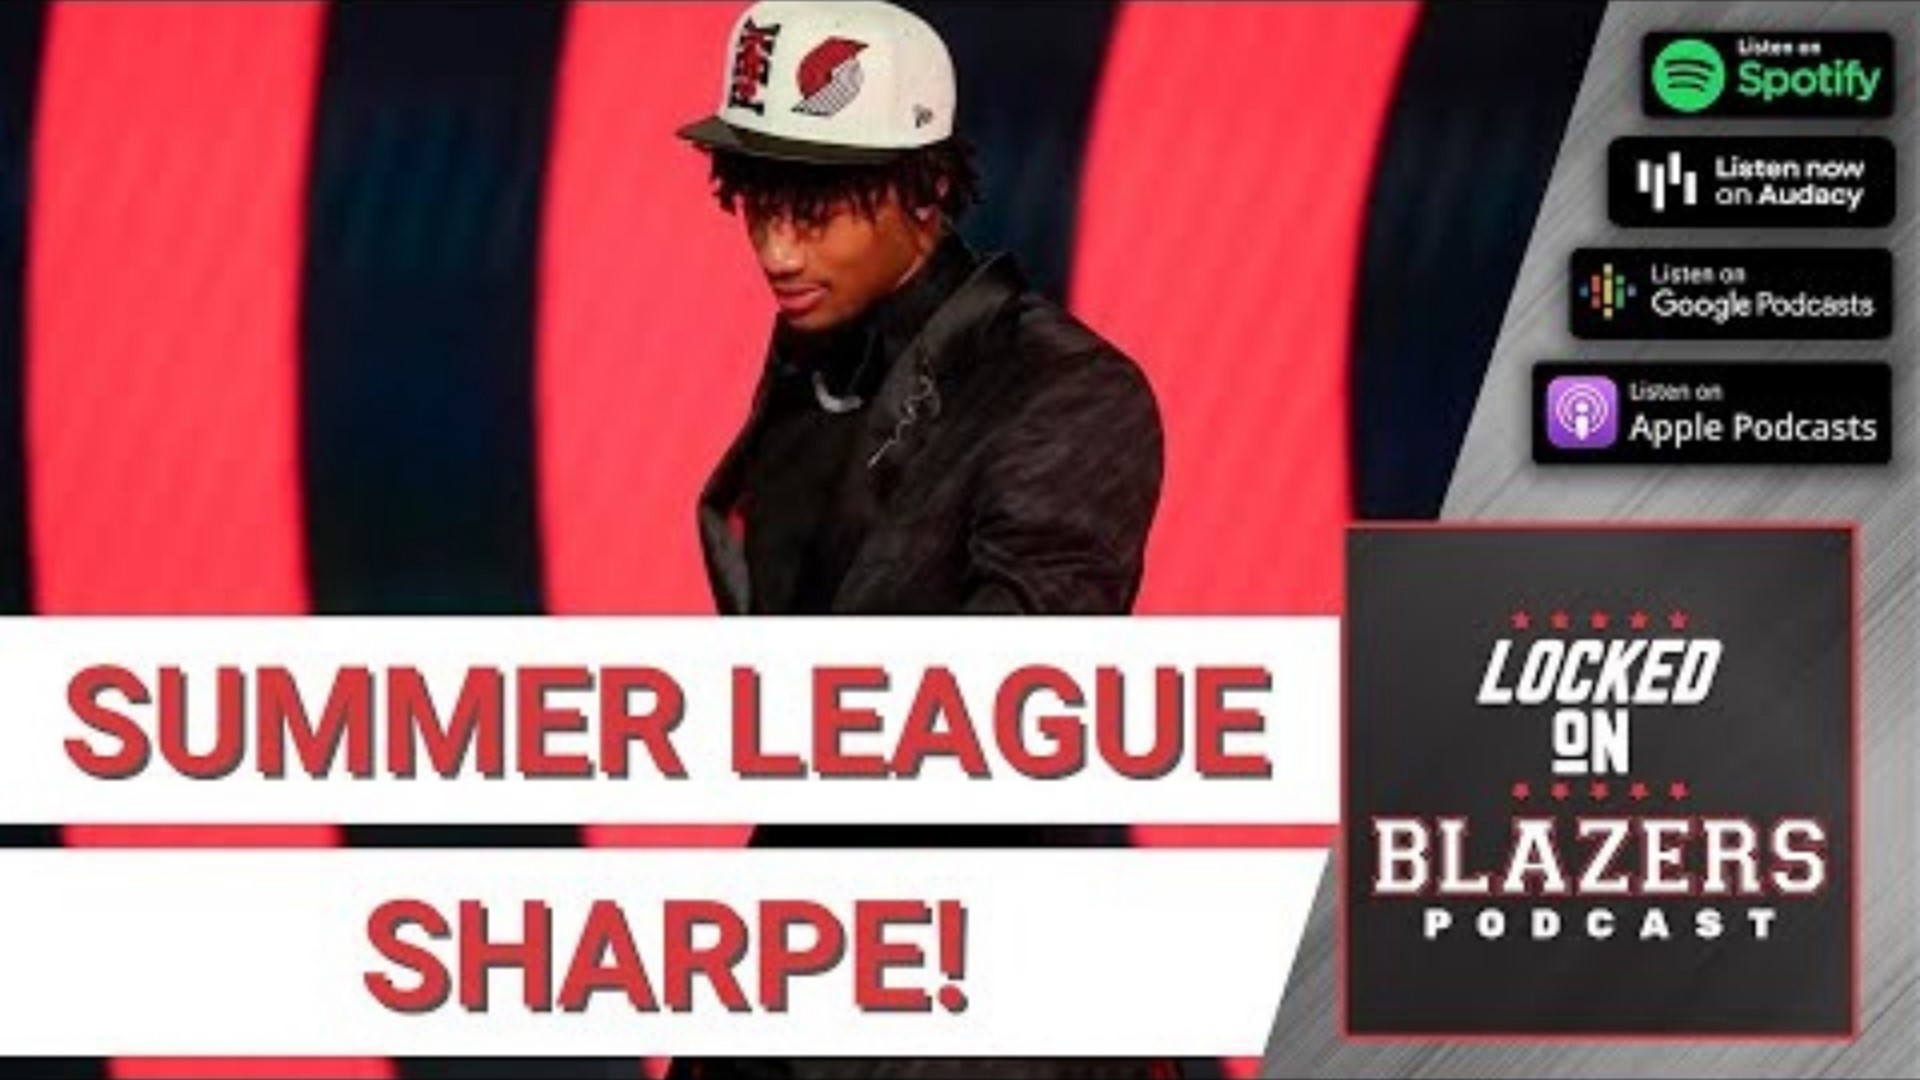 Getting excited for Shaedon Sharpe's summer league debut.